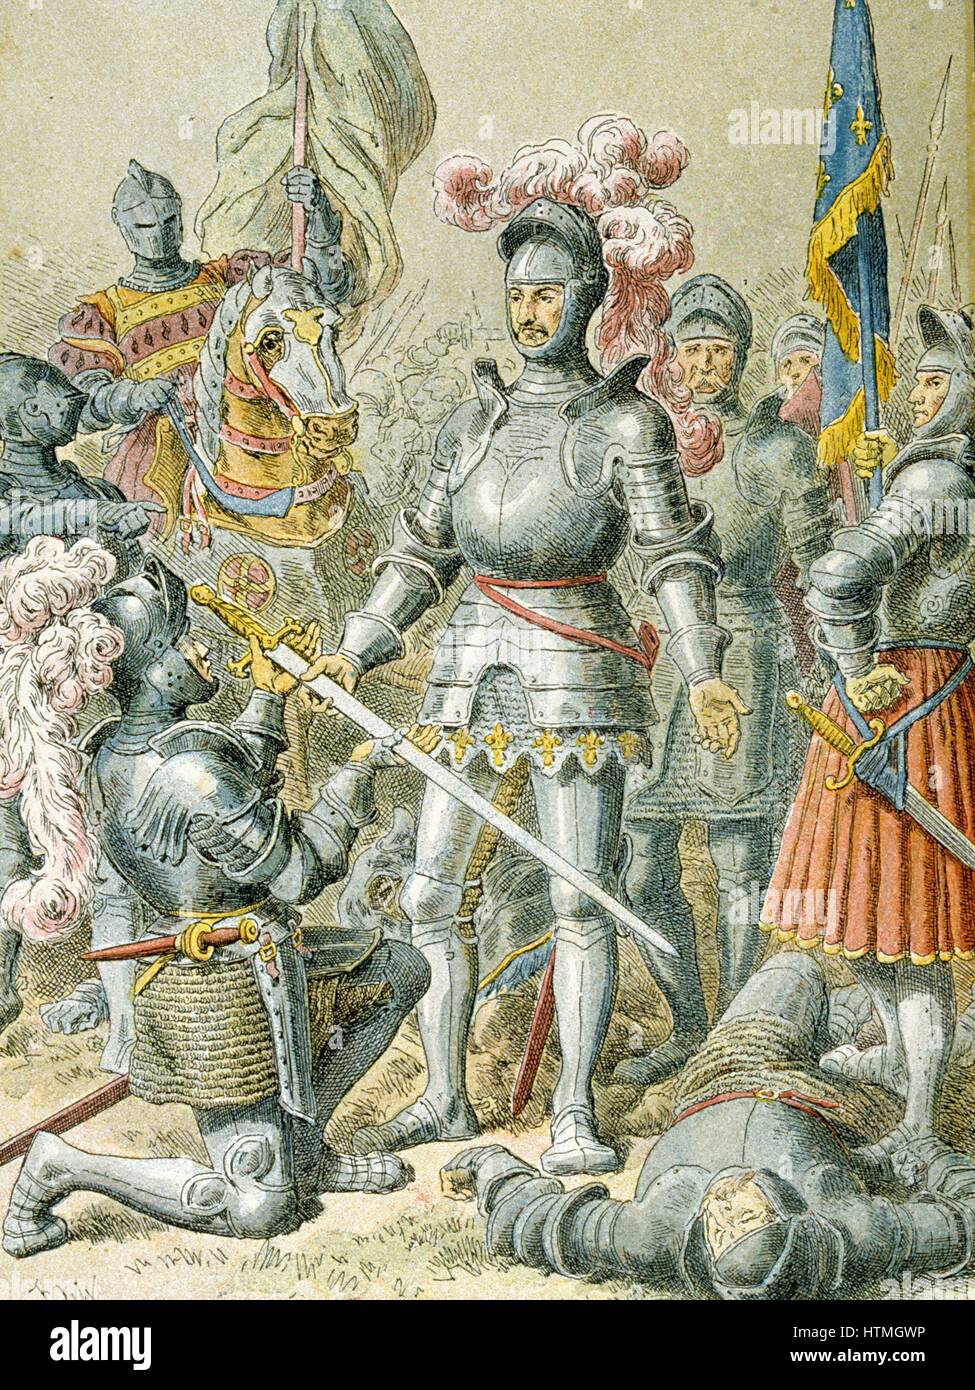 Francois I (1494-1547) King of France from 1515. Francois at the Battle of Pavia, 24 February 1525, where he was captured by the Spanish troops and imprisoned by Charles V. Stock Photo